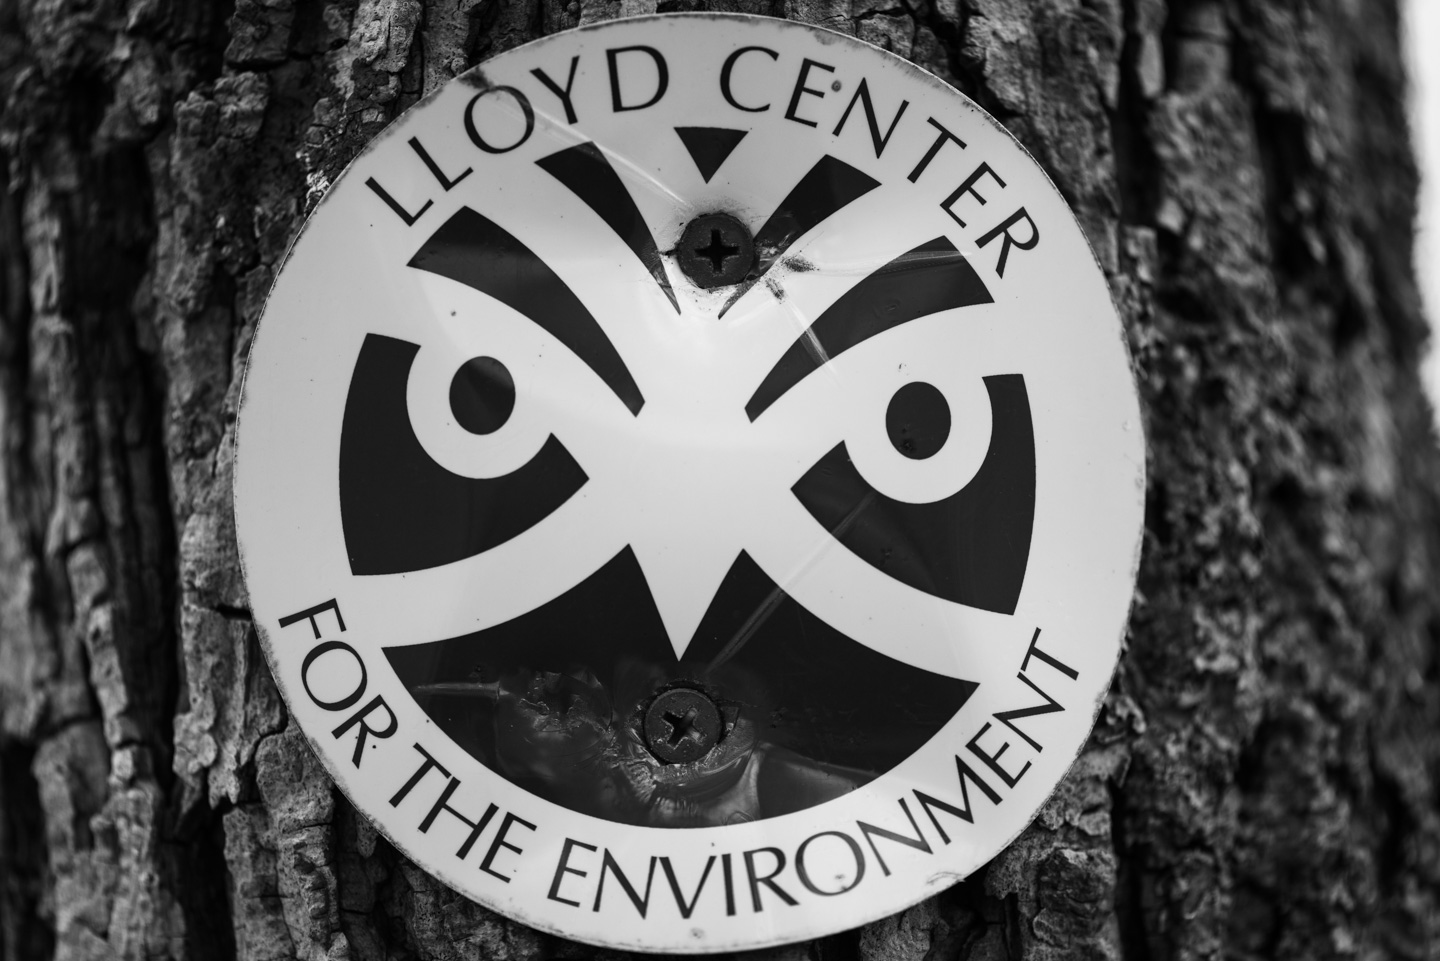 A tree with a metal circle that has the Lloyd Center symbol on it